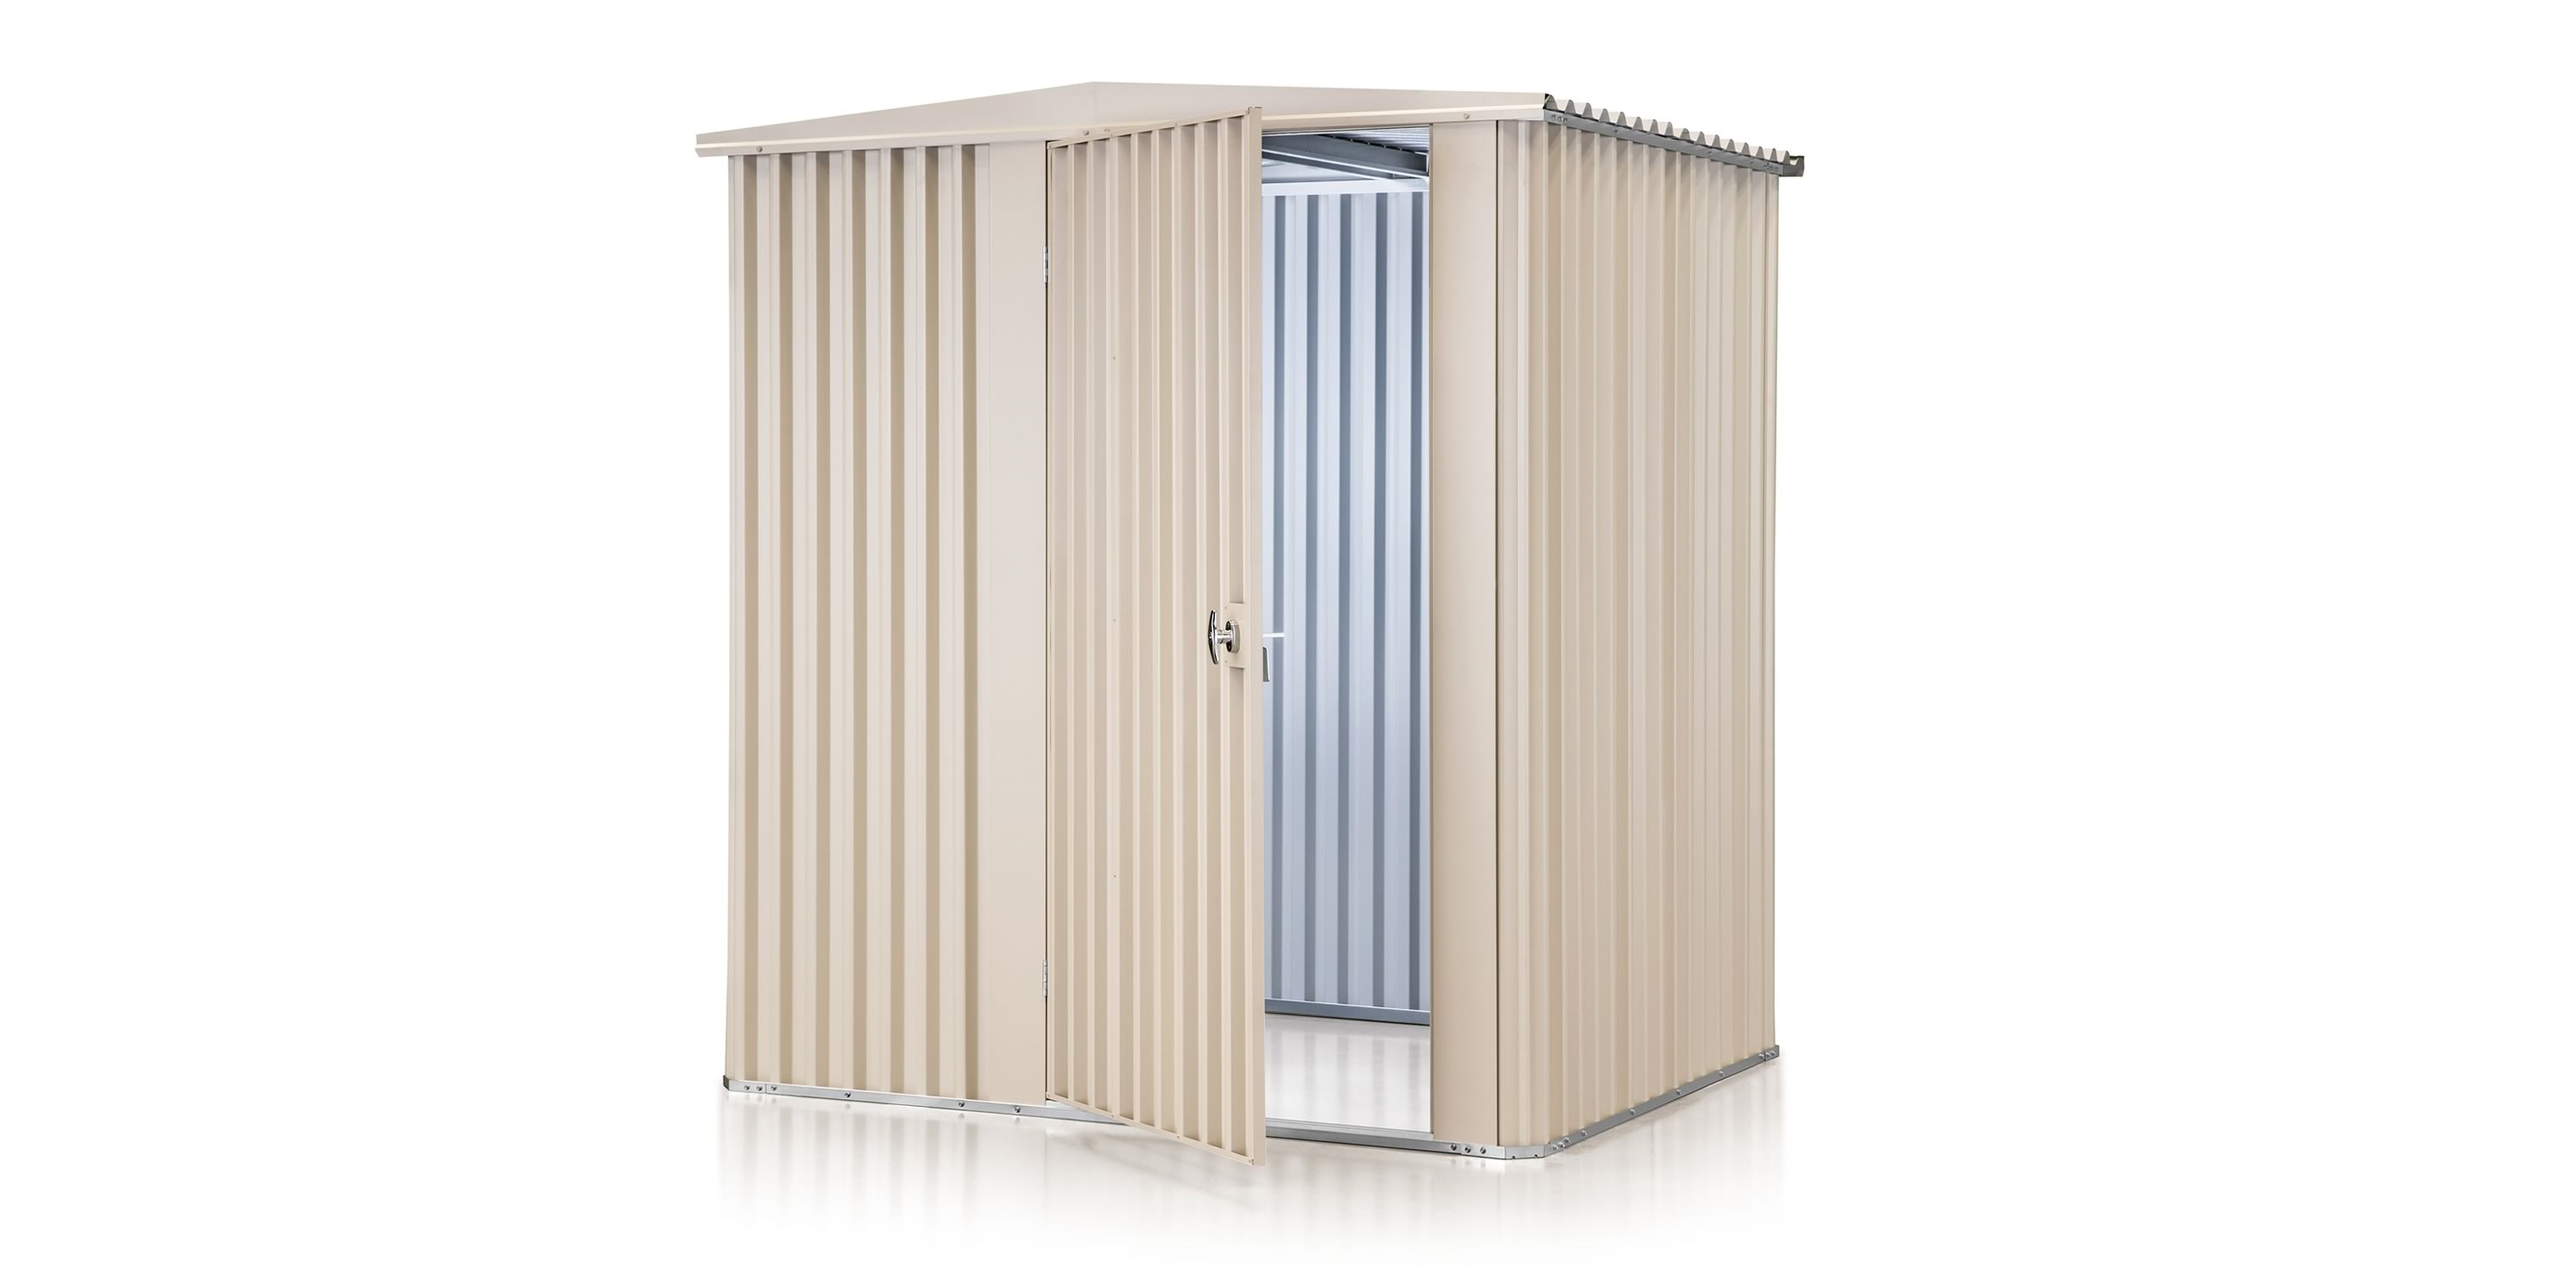 Handi-Mate Shed with hinged door (2210mm x 1470mm x 1900mm)